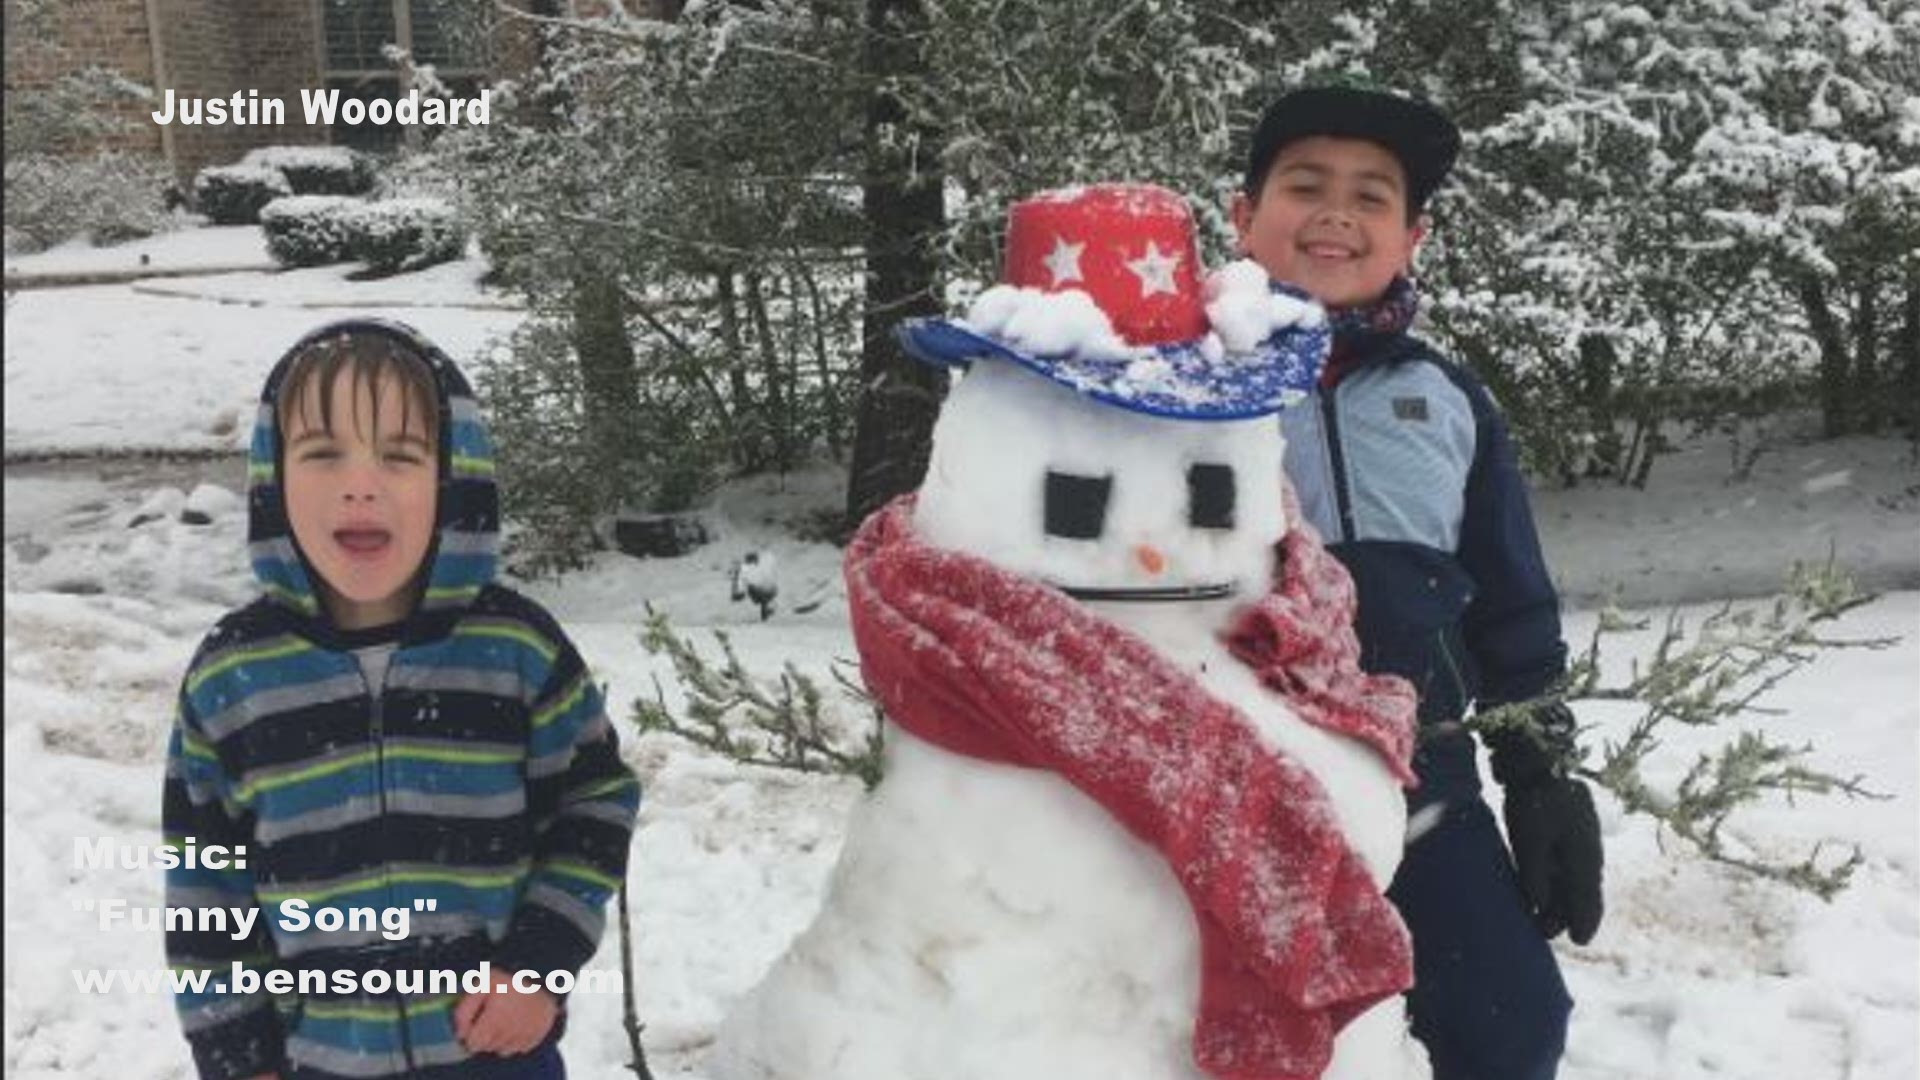 Send us your photos and pics of how you're spending the snow day in the Brazos Valley!